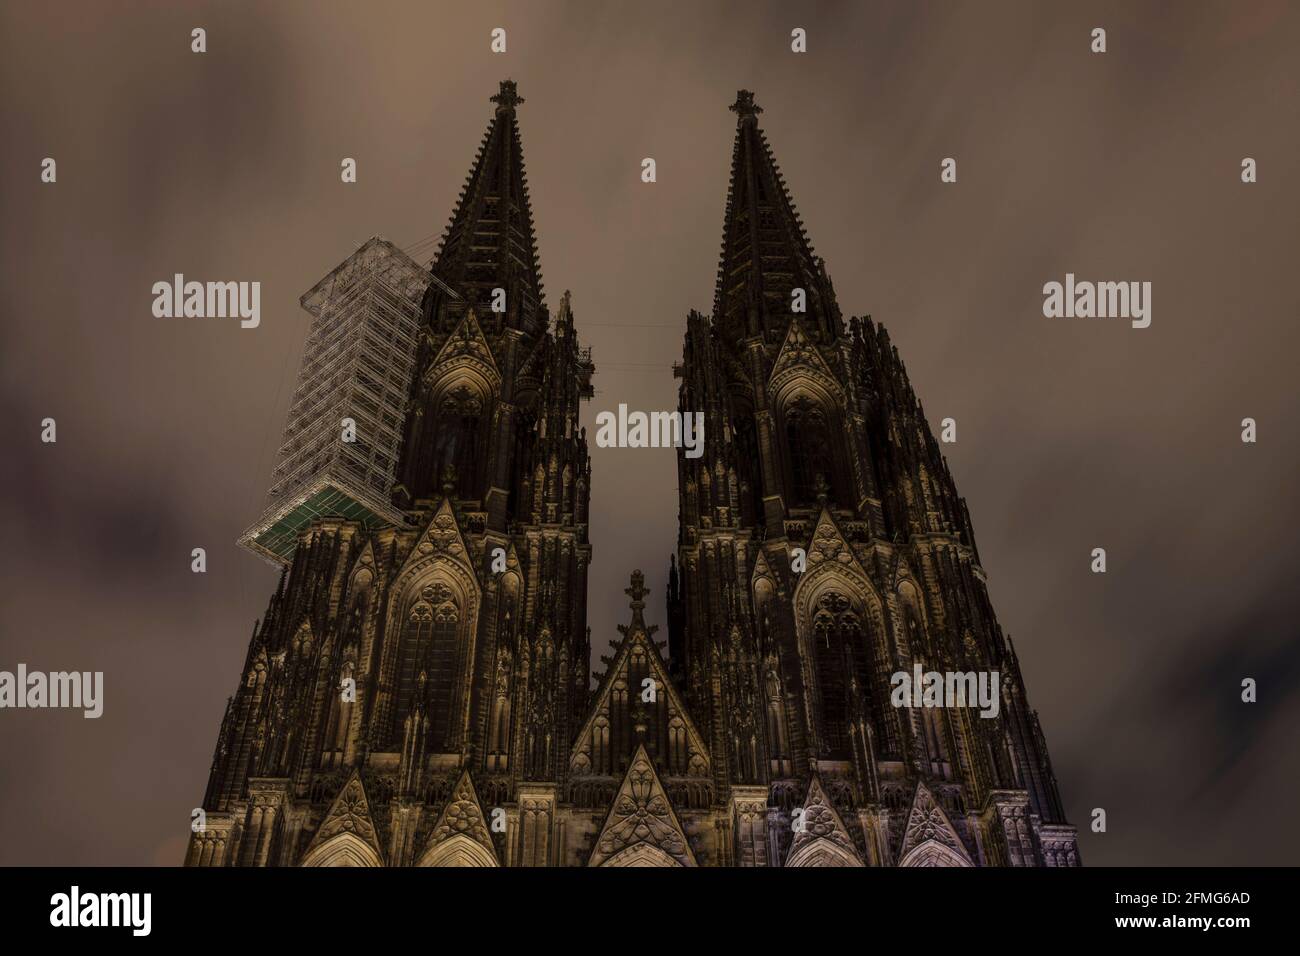 curfew from 9 pm during corona pandemic lockdown on May 5th. 2021. The cathedral is not illuminated during these nights, Cologne, Germany.  Ausgangssp Stock Photo